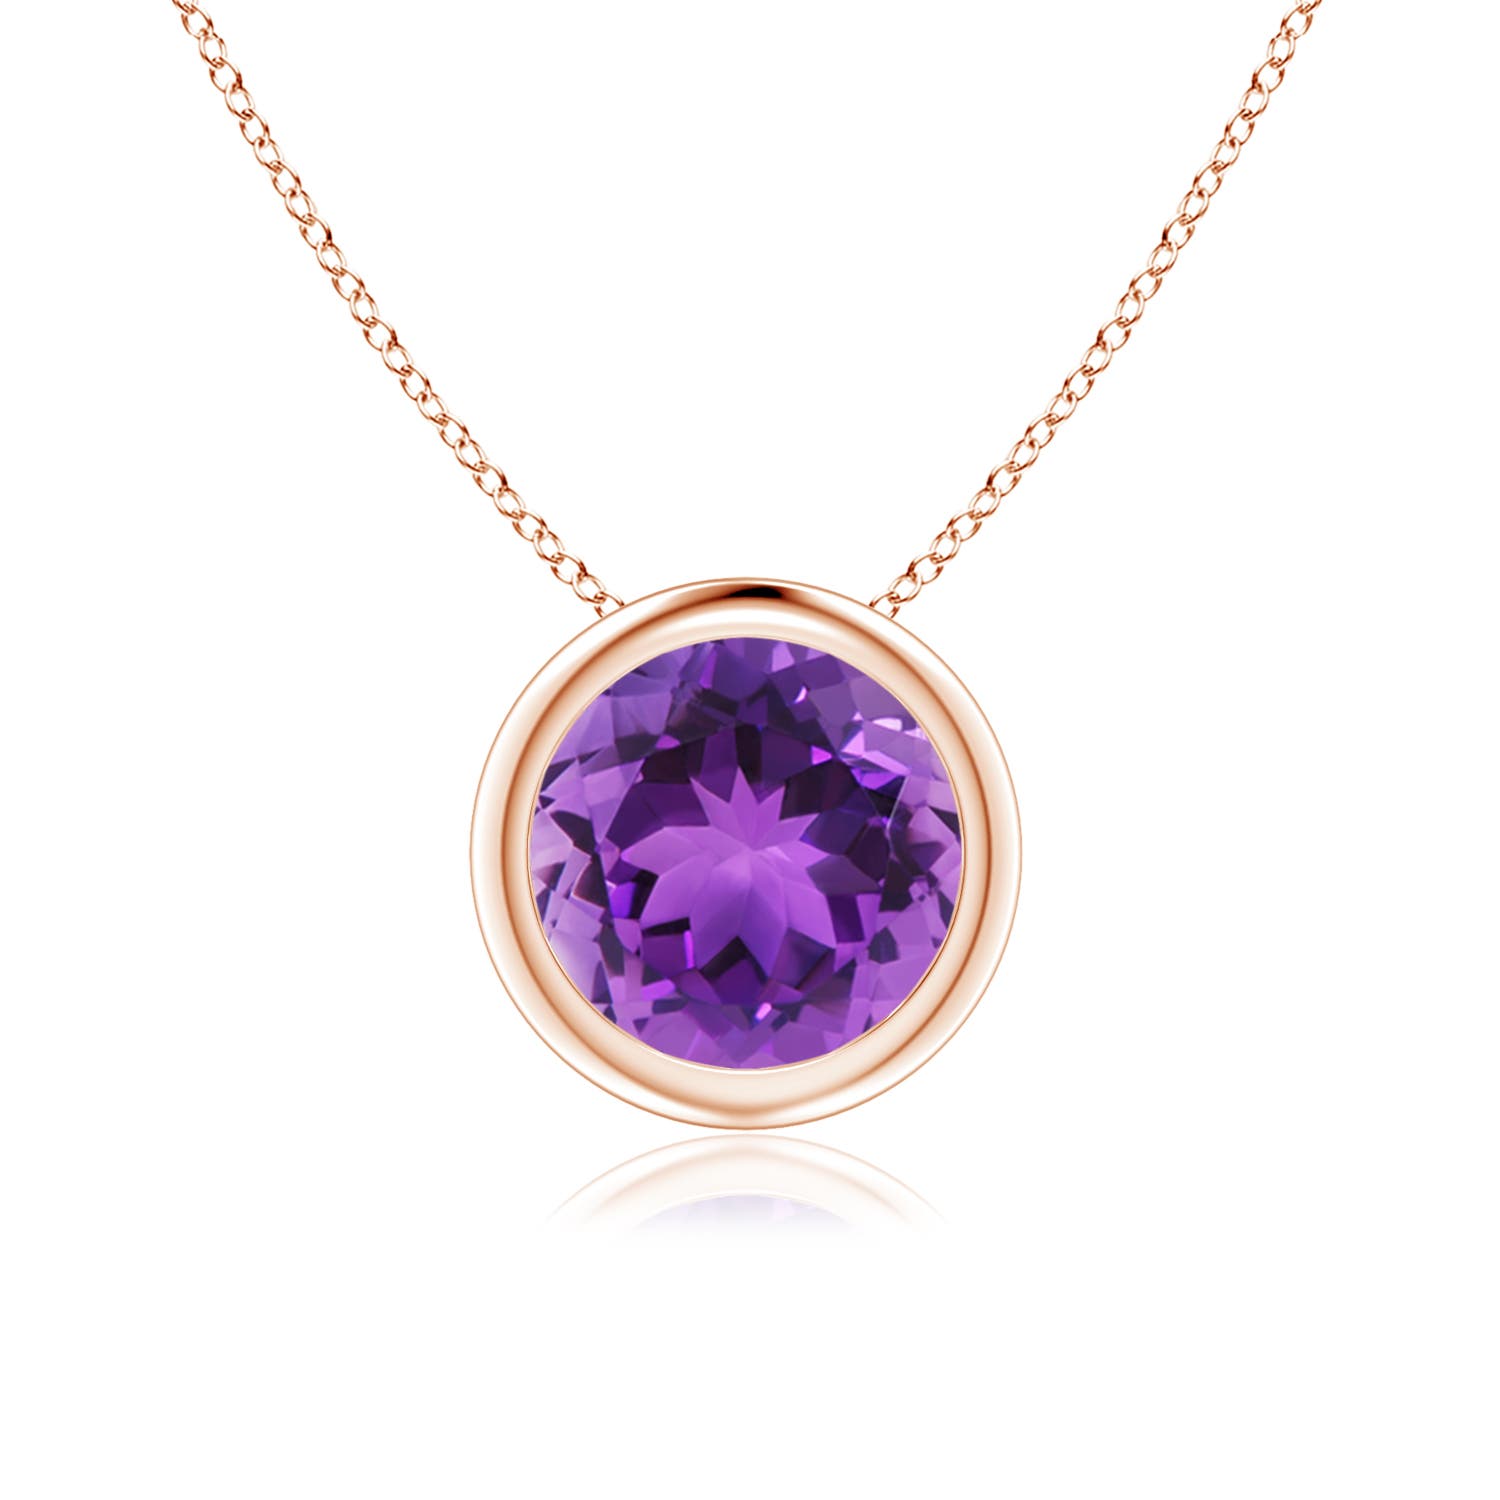 AAA - Amethyst / 1.15 CT / 14 KT Rose Gold